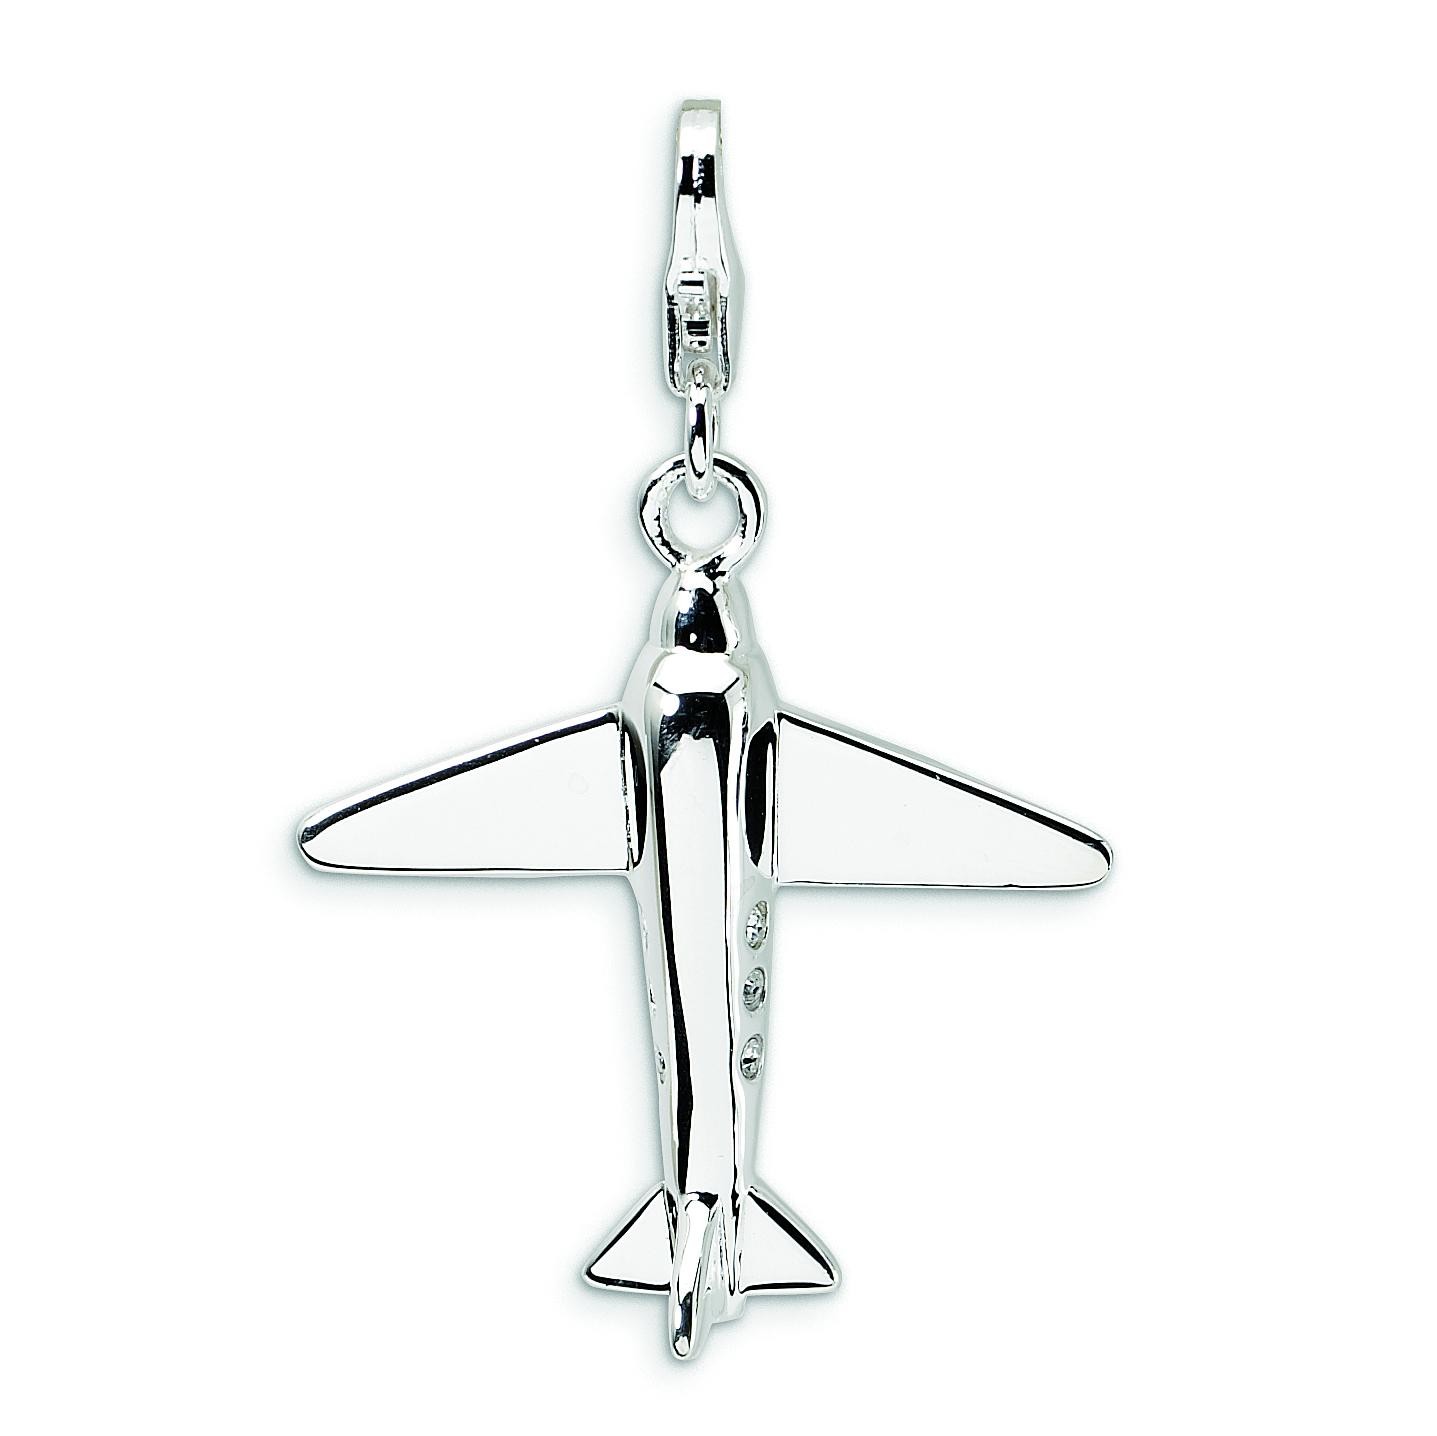 Swarovski Crystal Airplane Lobster Clasp Charm in Sterling Silver